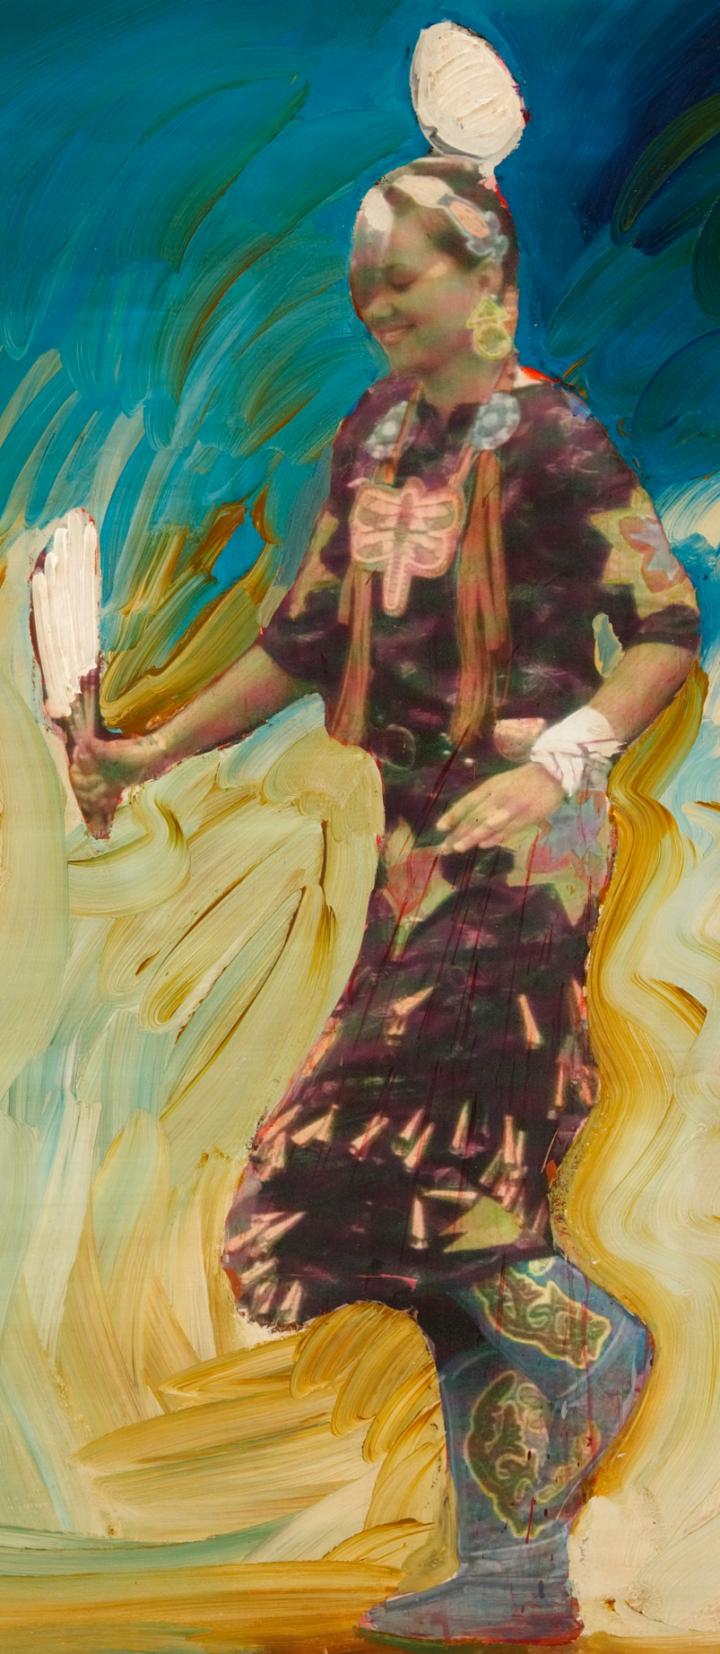 A detail of a painting of a Native American woman dancing